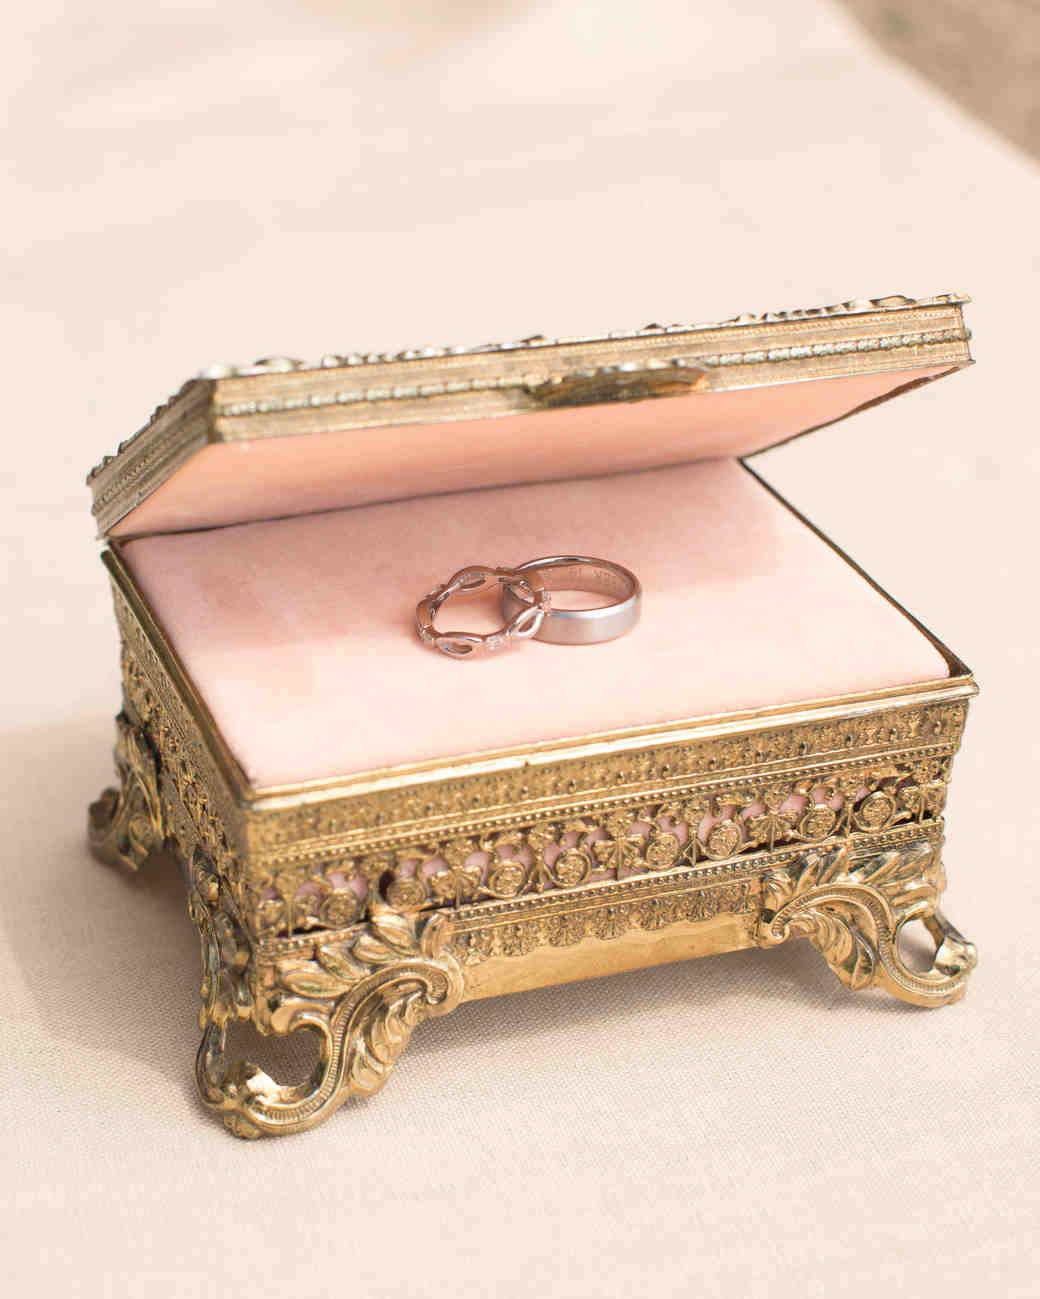 10 Wedding Ring Box Ideas  for Converting a Holder Into a 